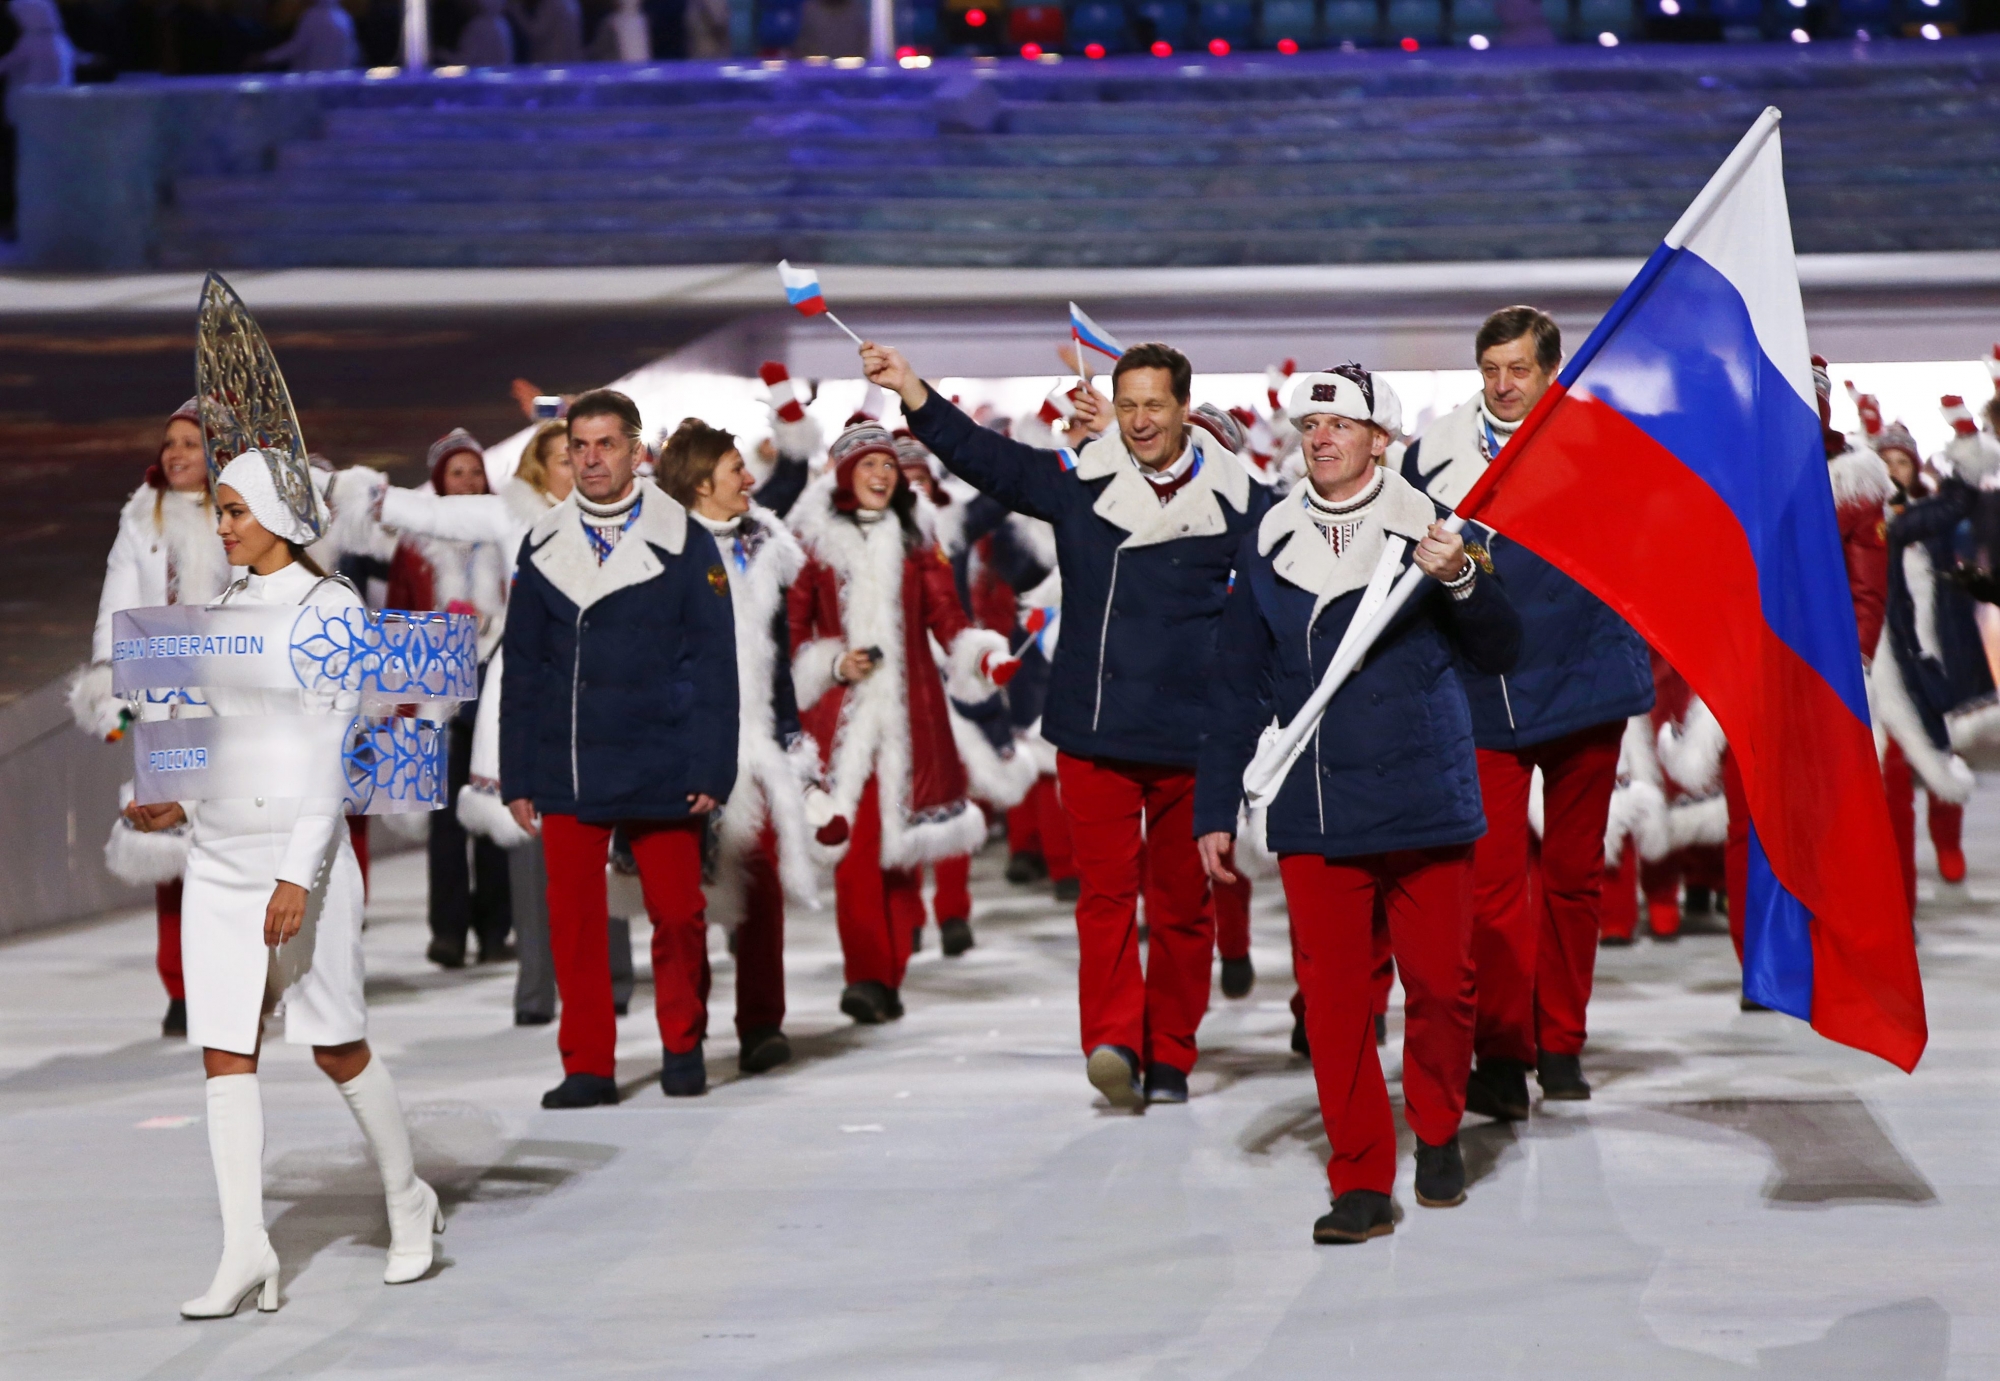 epa05303427 (FILE) A file picture dated 07 February 2014 of Team Russia with flag bearer Alexander Zubkov (R) during the Opening Ceremony of the Sochi 2014 Olympic Games at the Fisht Olympic Stadium in Sochi, Russia. The International Olympic Committee (IOC) on 13 May 2016 called for immediate investigations on allegations of Russian state-sponsored doping at the Sochi 2014 Olympic Games. Grigory Rodchenkov, former head of Russia's anti-doping laboratory, admitted that banned performance-enhancing substances have been supplied and urine samples have been exchanged before and during the Sochi 2014 Olympics, the New York Times reported on 12 May 2016.  EPA/BARBARA WALTON *** Local Caption *** 51215598